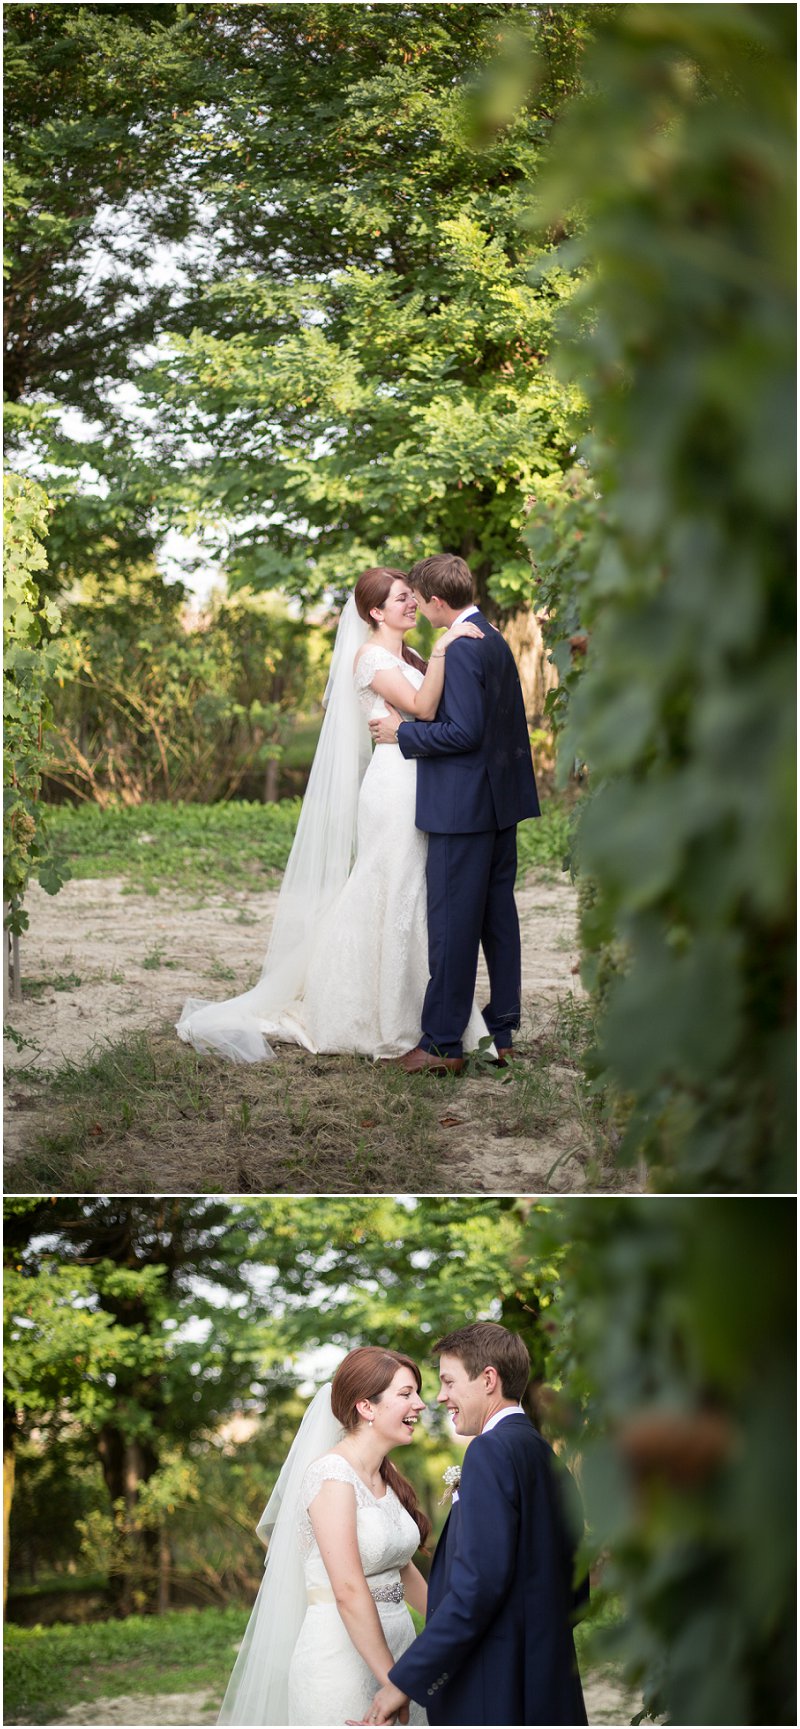 Bride and groom during portrait shoot in Vineyard, Italy